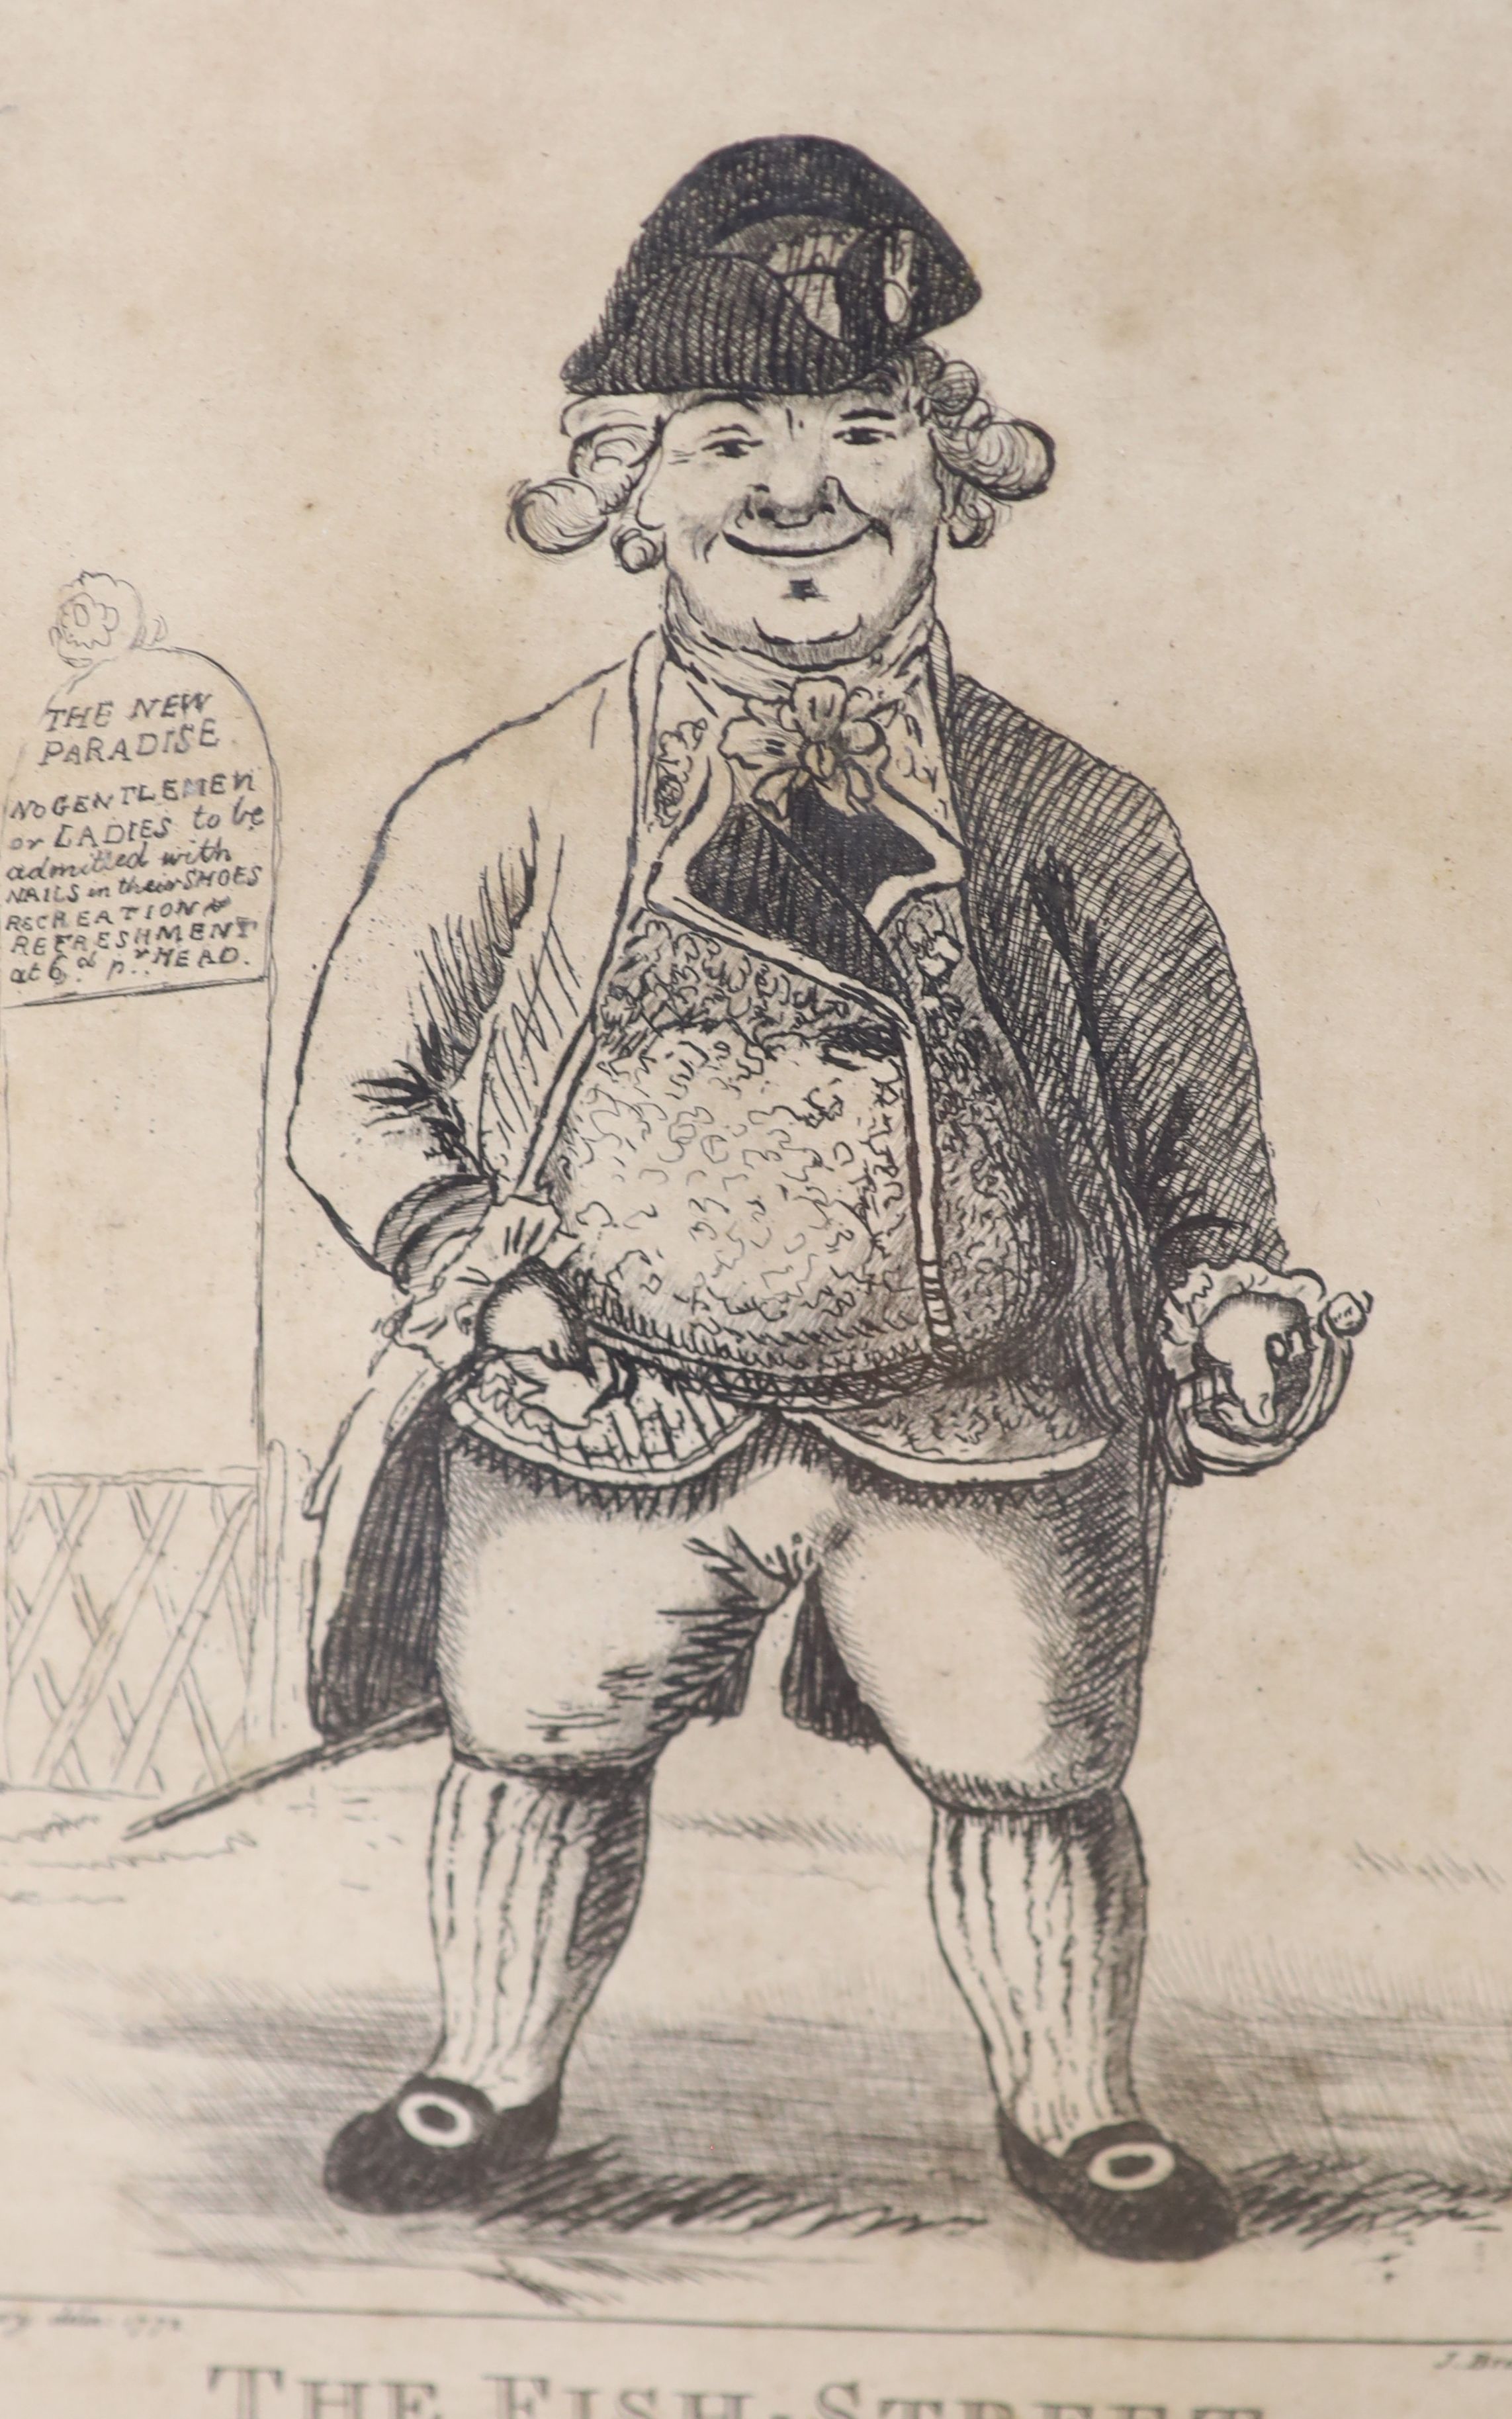 Bunbury after Bretherton, two engravings, The Fish Street Macaroni and Country Gentleman, 26 x 17cm